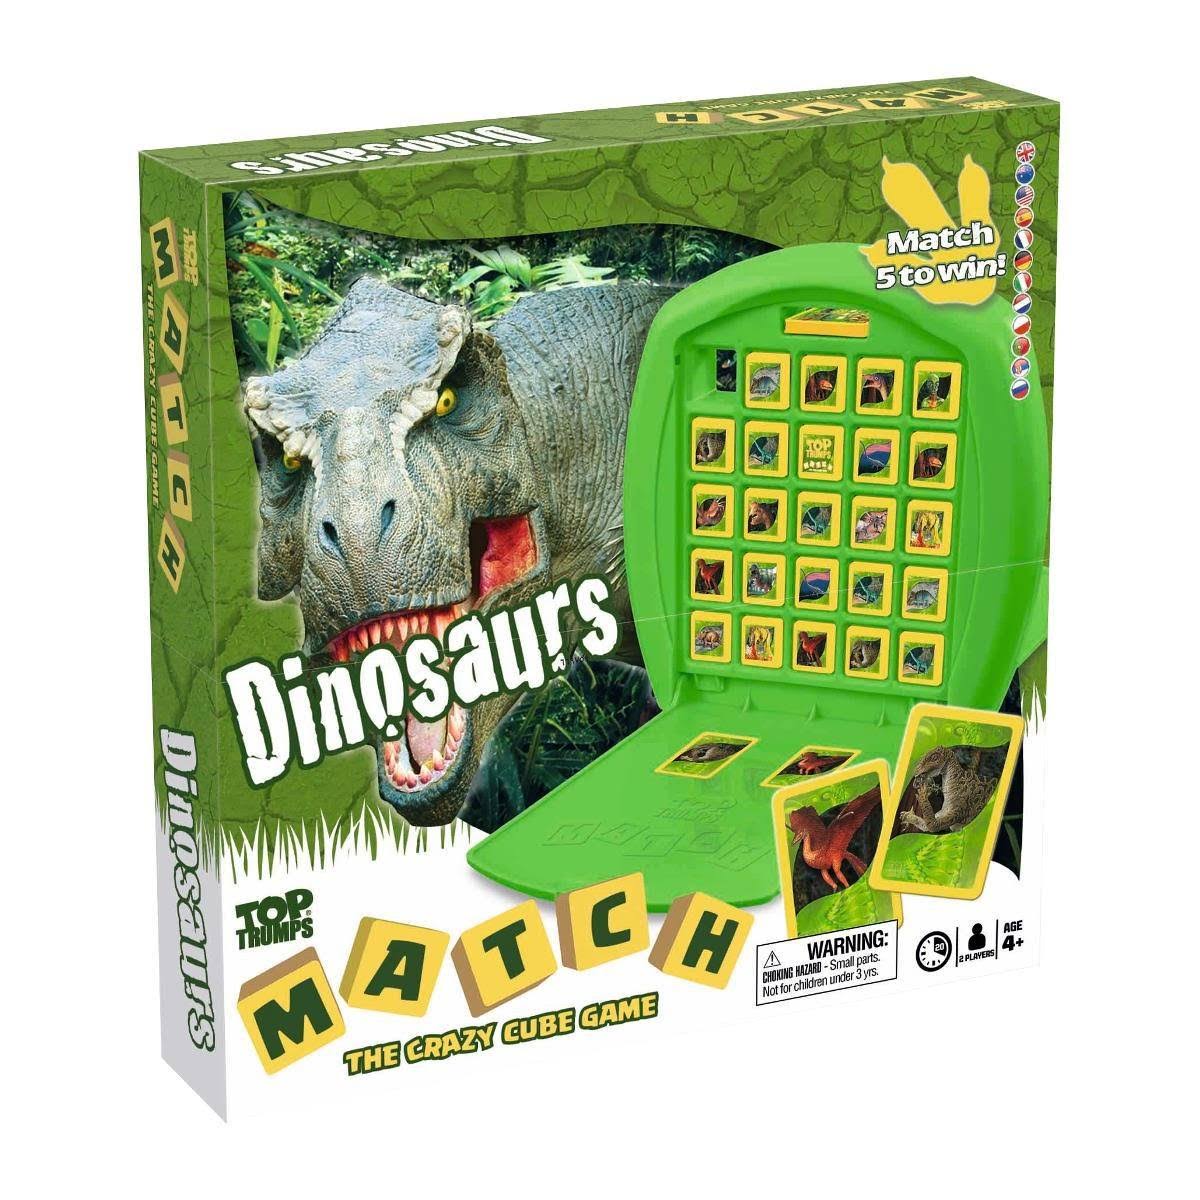 Top Trumps Dinosaurs Match Board Game